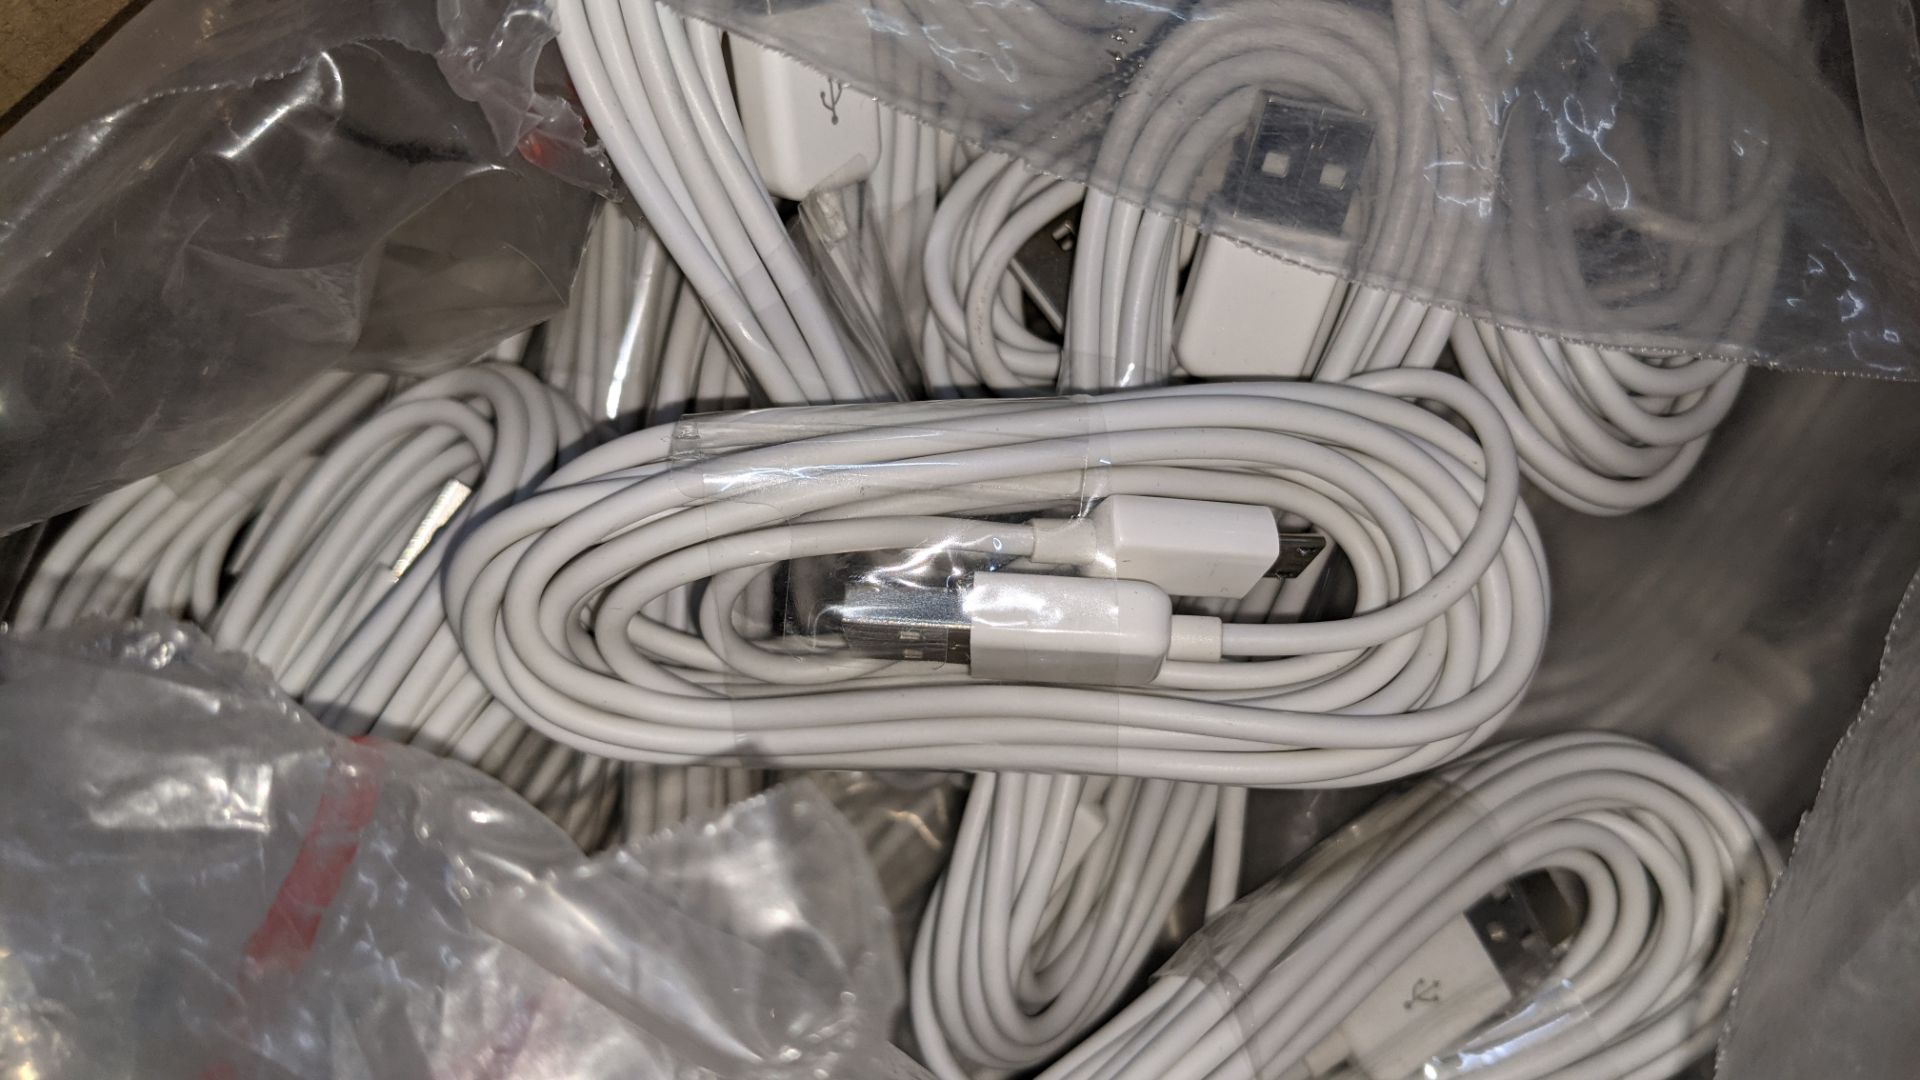 129 off USB to micro USB cables - Image 3 of 4